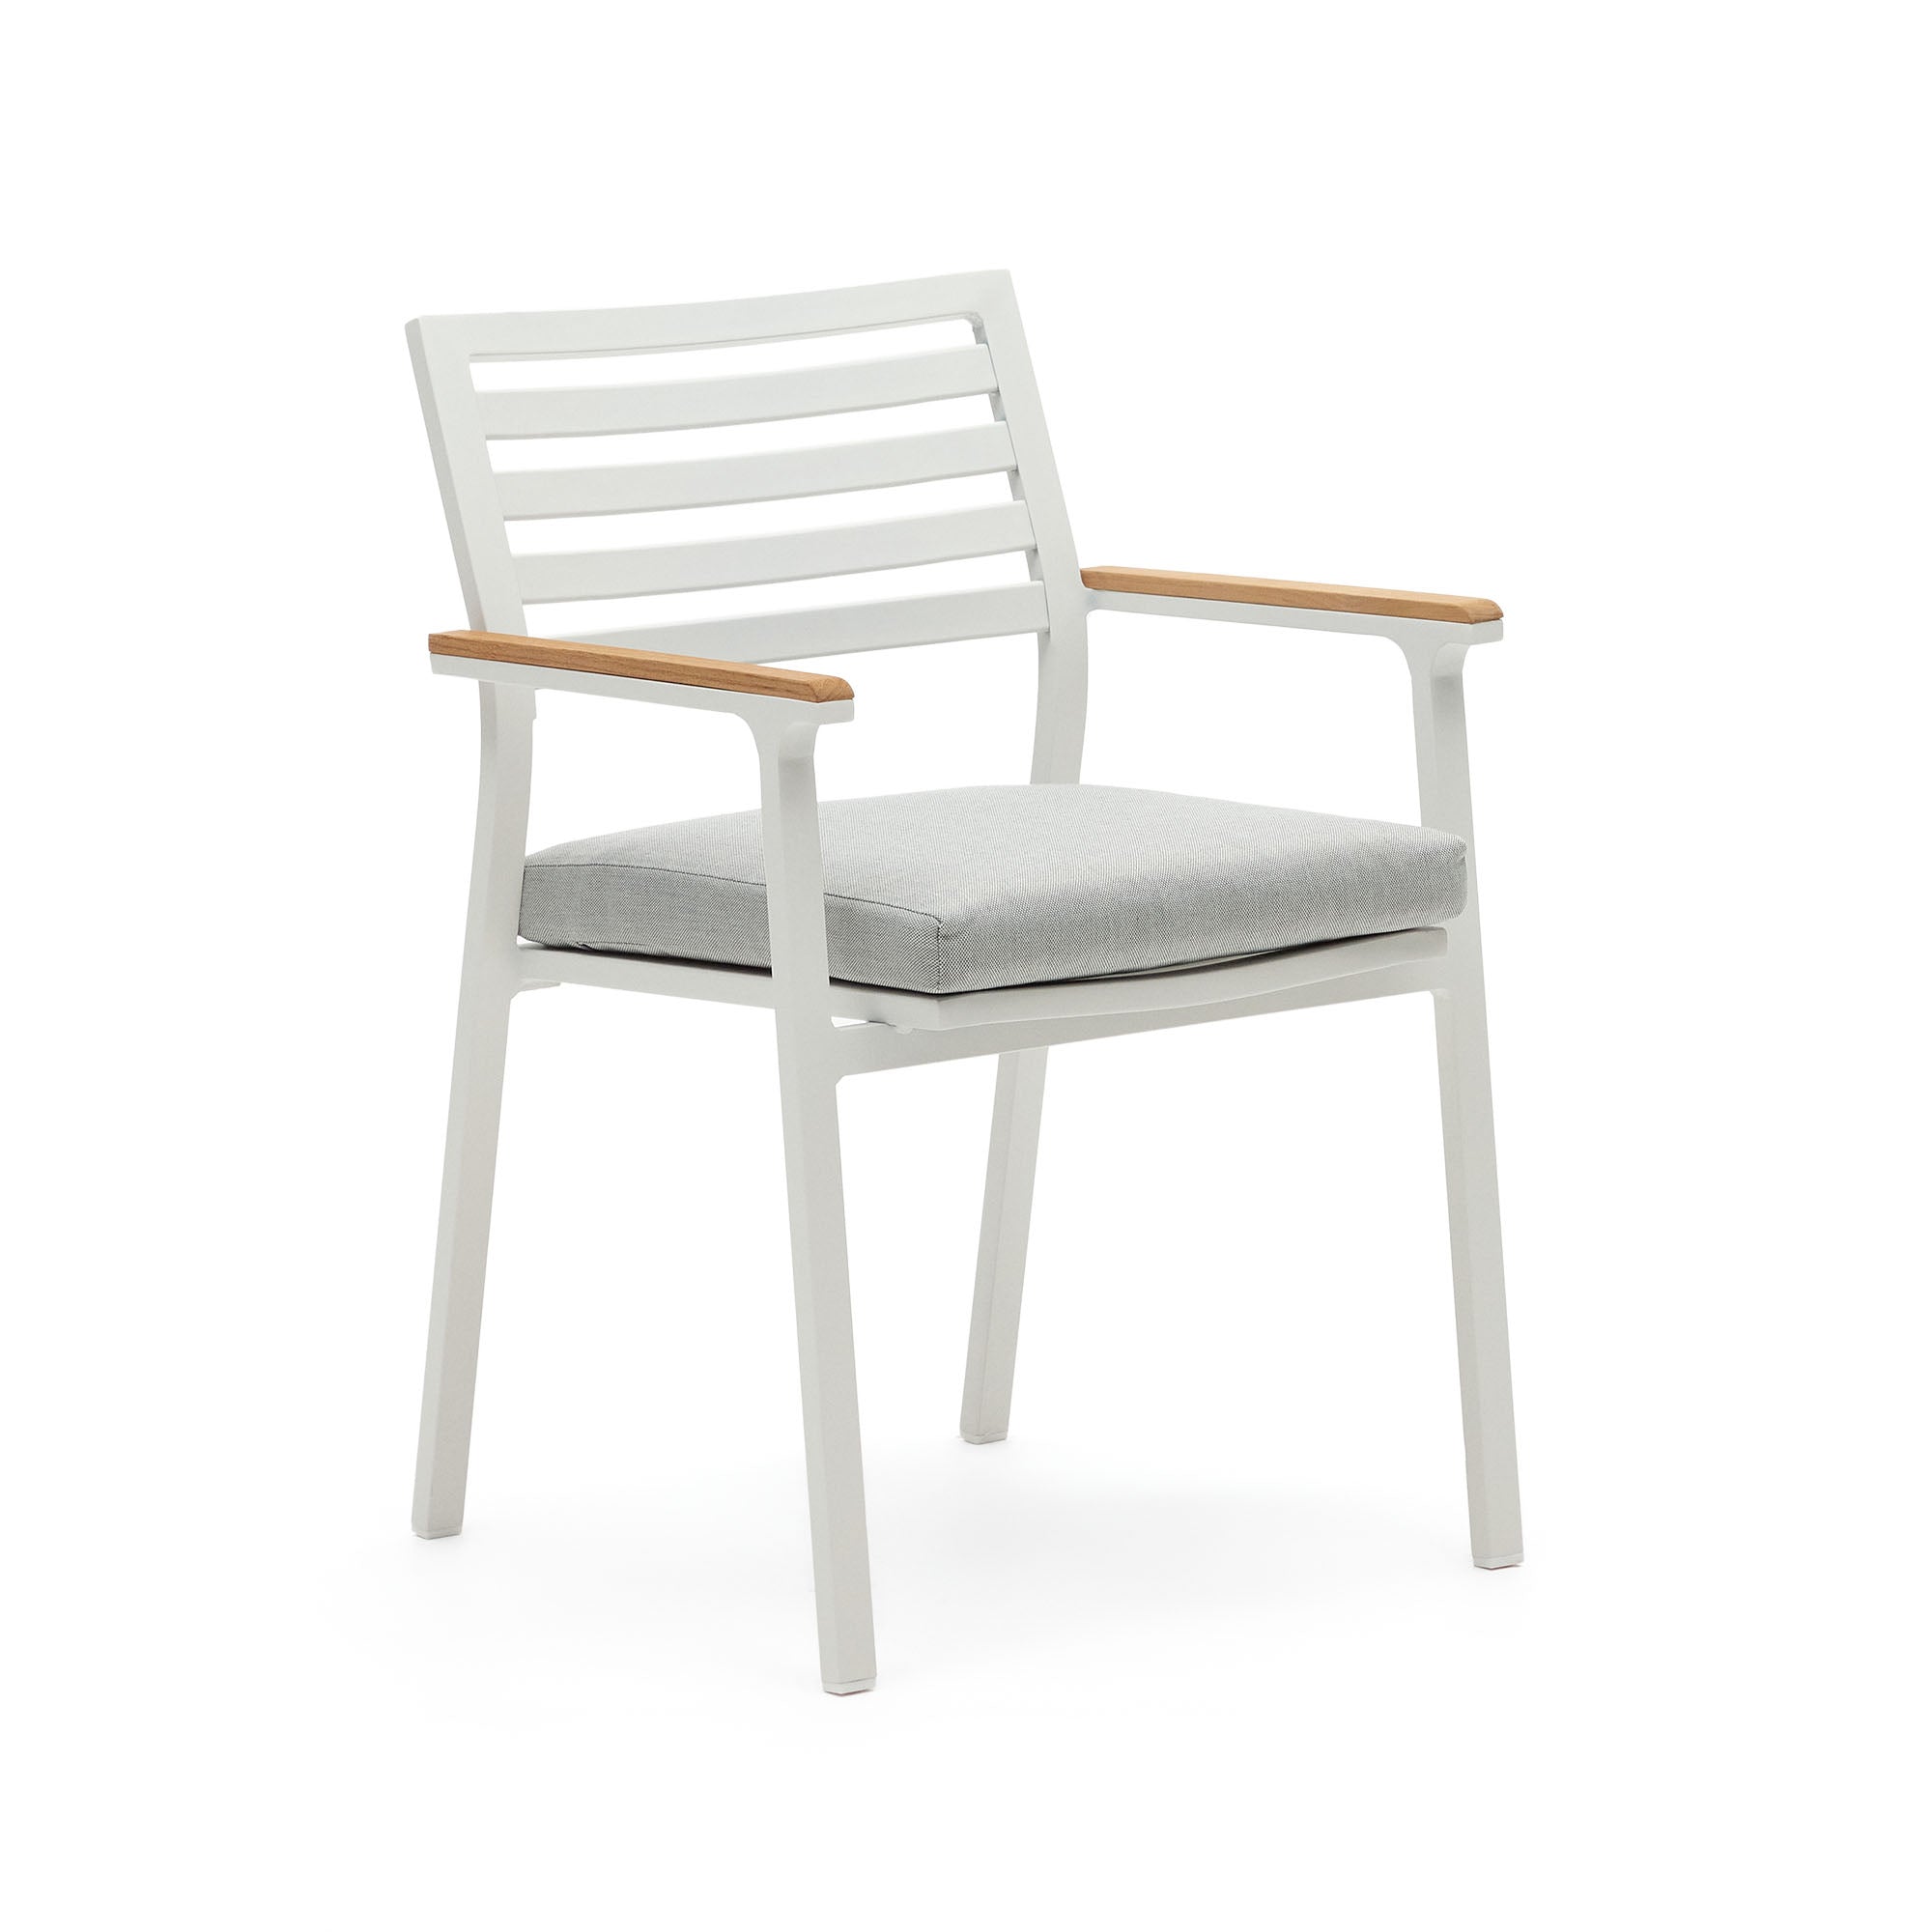 Bona aluminium stackable garden chair with a white finish and solid teak wood armrests